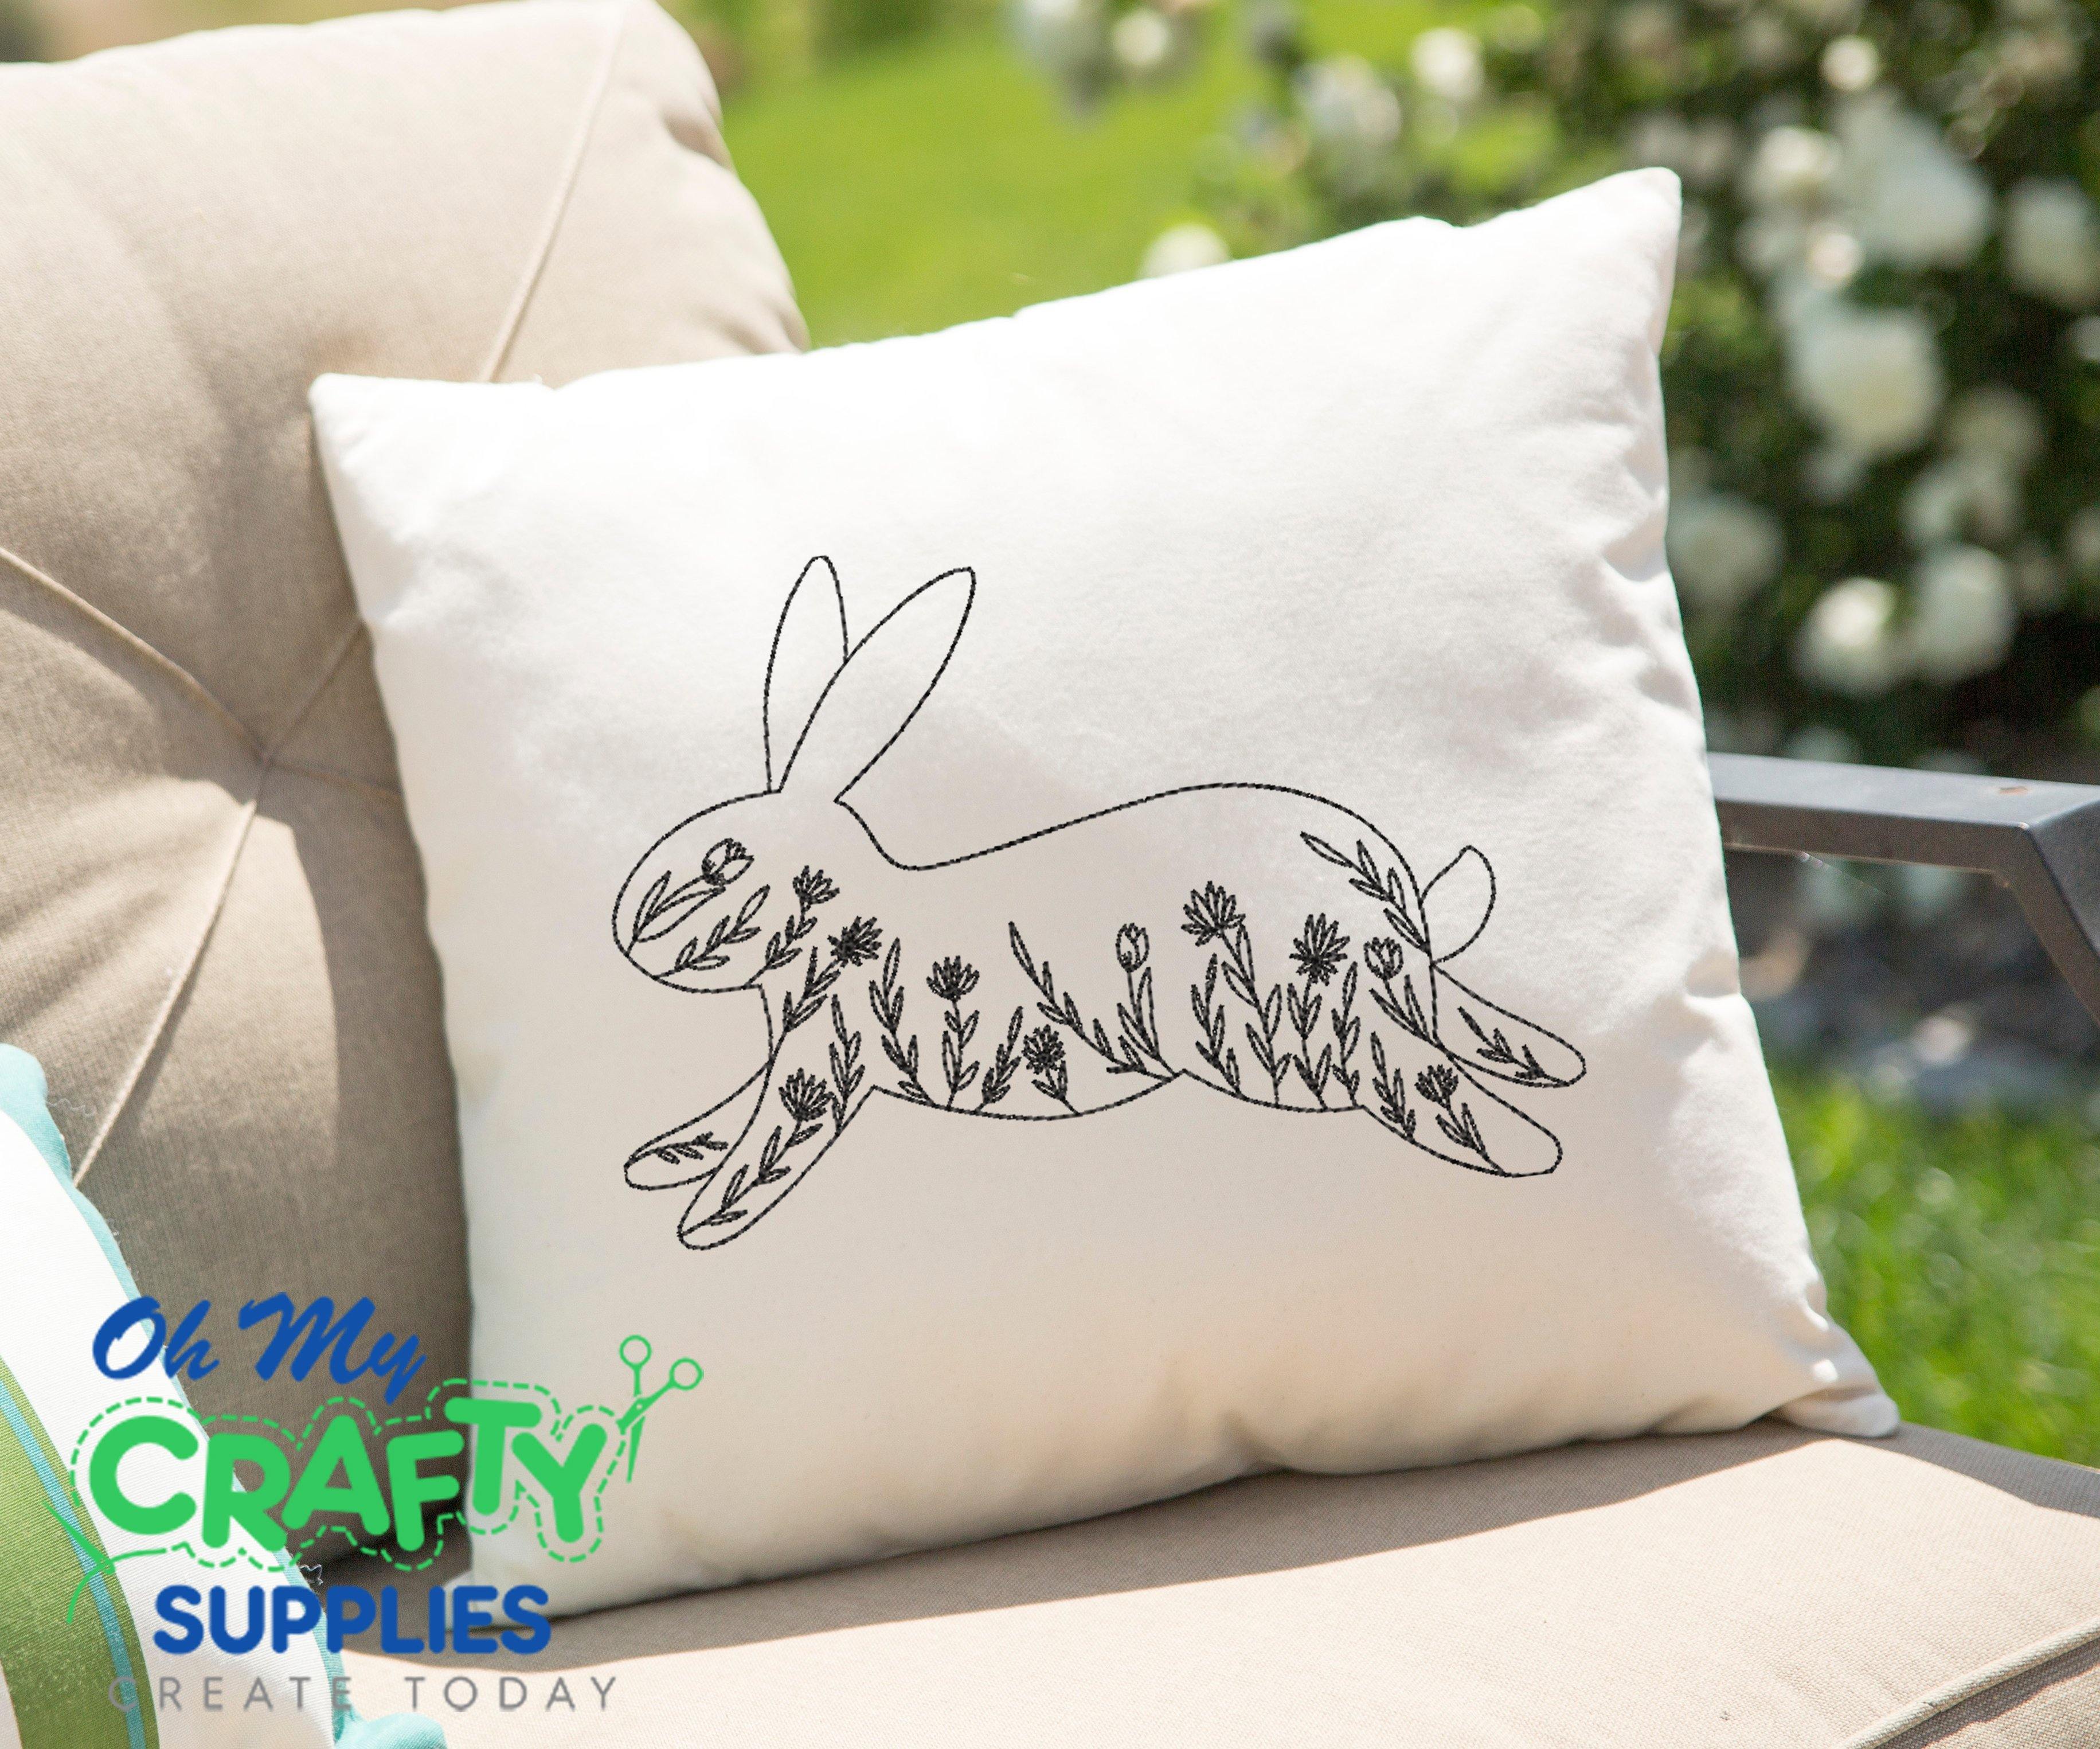 Floral Line Art Bunny Embroidery Design - Oh My Crafty Supplies Inc.